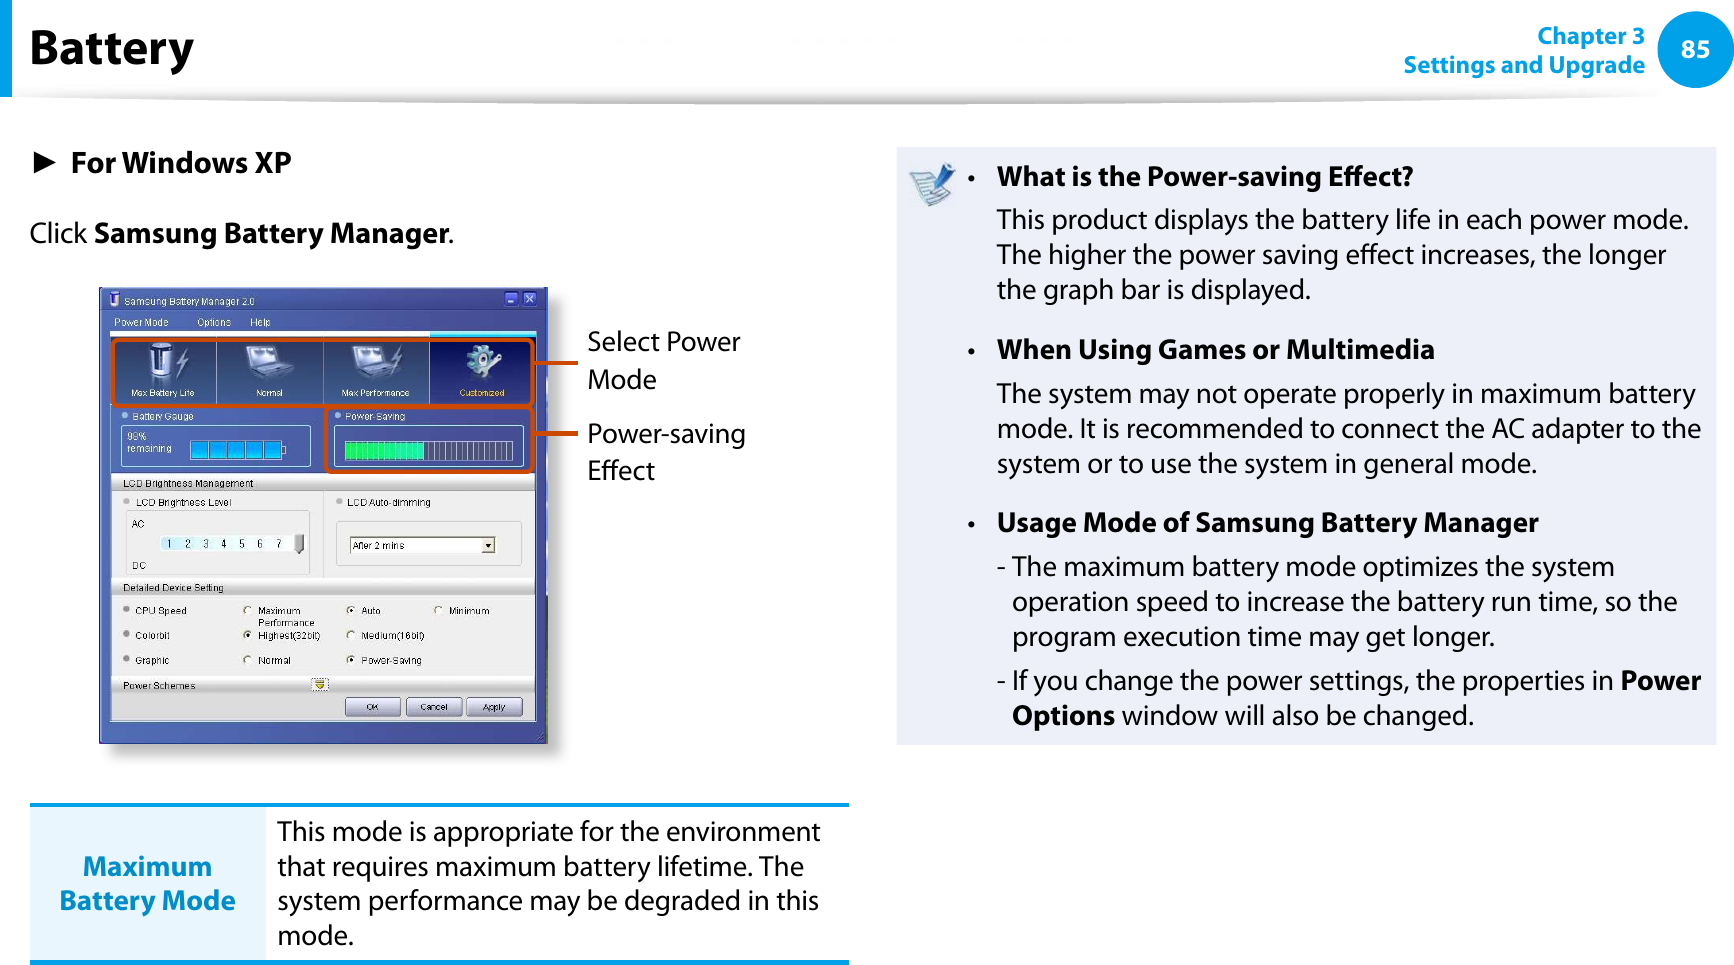 85Chapter 3Settings and UpgradeBatteryŹFor Windows XPClick Samsung Battery Manager.Select Power ModePower-saving EectMaximum Battery ModeThis mode is appropriate for the environment that requires maximum battery lifetime. The system performance may be degraded in this mode.What is the Power-saving Eect?tThis product displays the battery life in each power mode. The higher the power saving eect increases, the longer the graph bar is displayed.When Using Games or MultimediatThe system may not operate properly in maximum battery mode. It is recommended to connect the AC adapter to the system or to use the system in general mode.Usage Mode of Samsung Battery Managert- The maximum battery mode optimizes the system operation speed to increase the battery run time, so the program execution time may get longer.- If you change the power settings, the properties in Power Options window will also be changed.